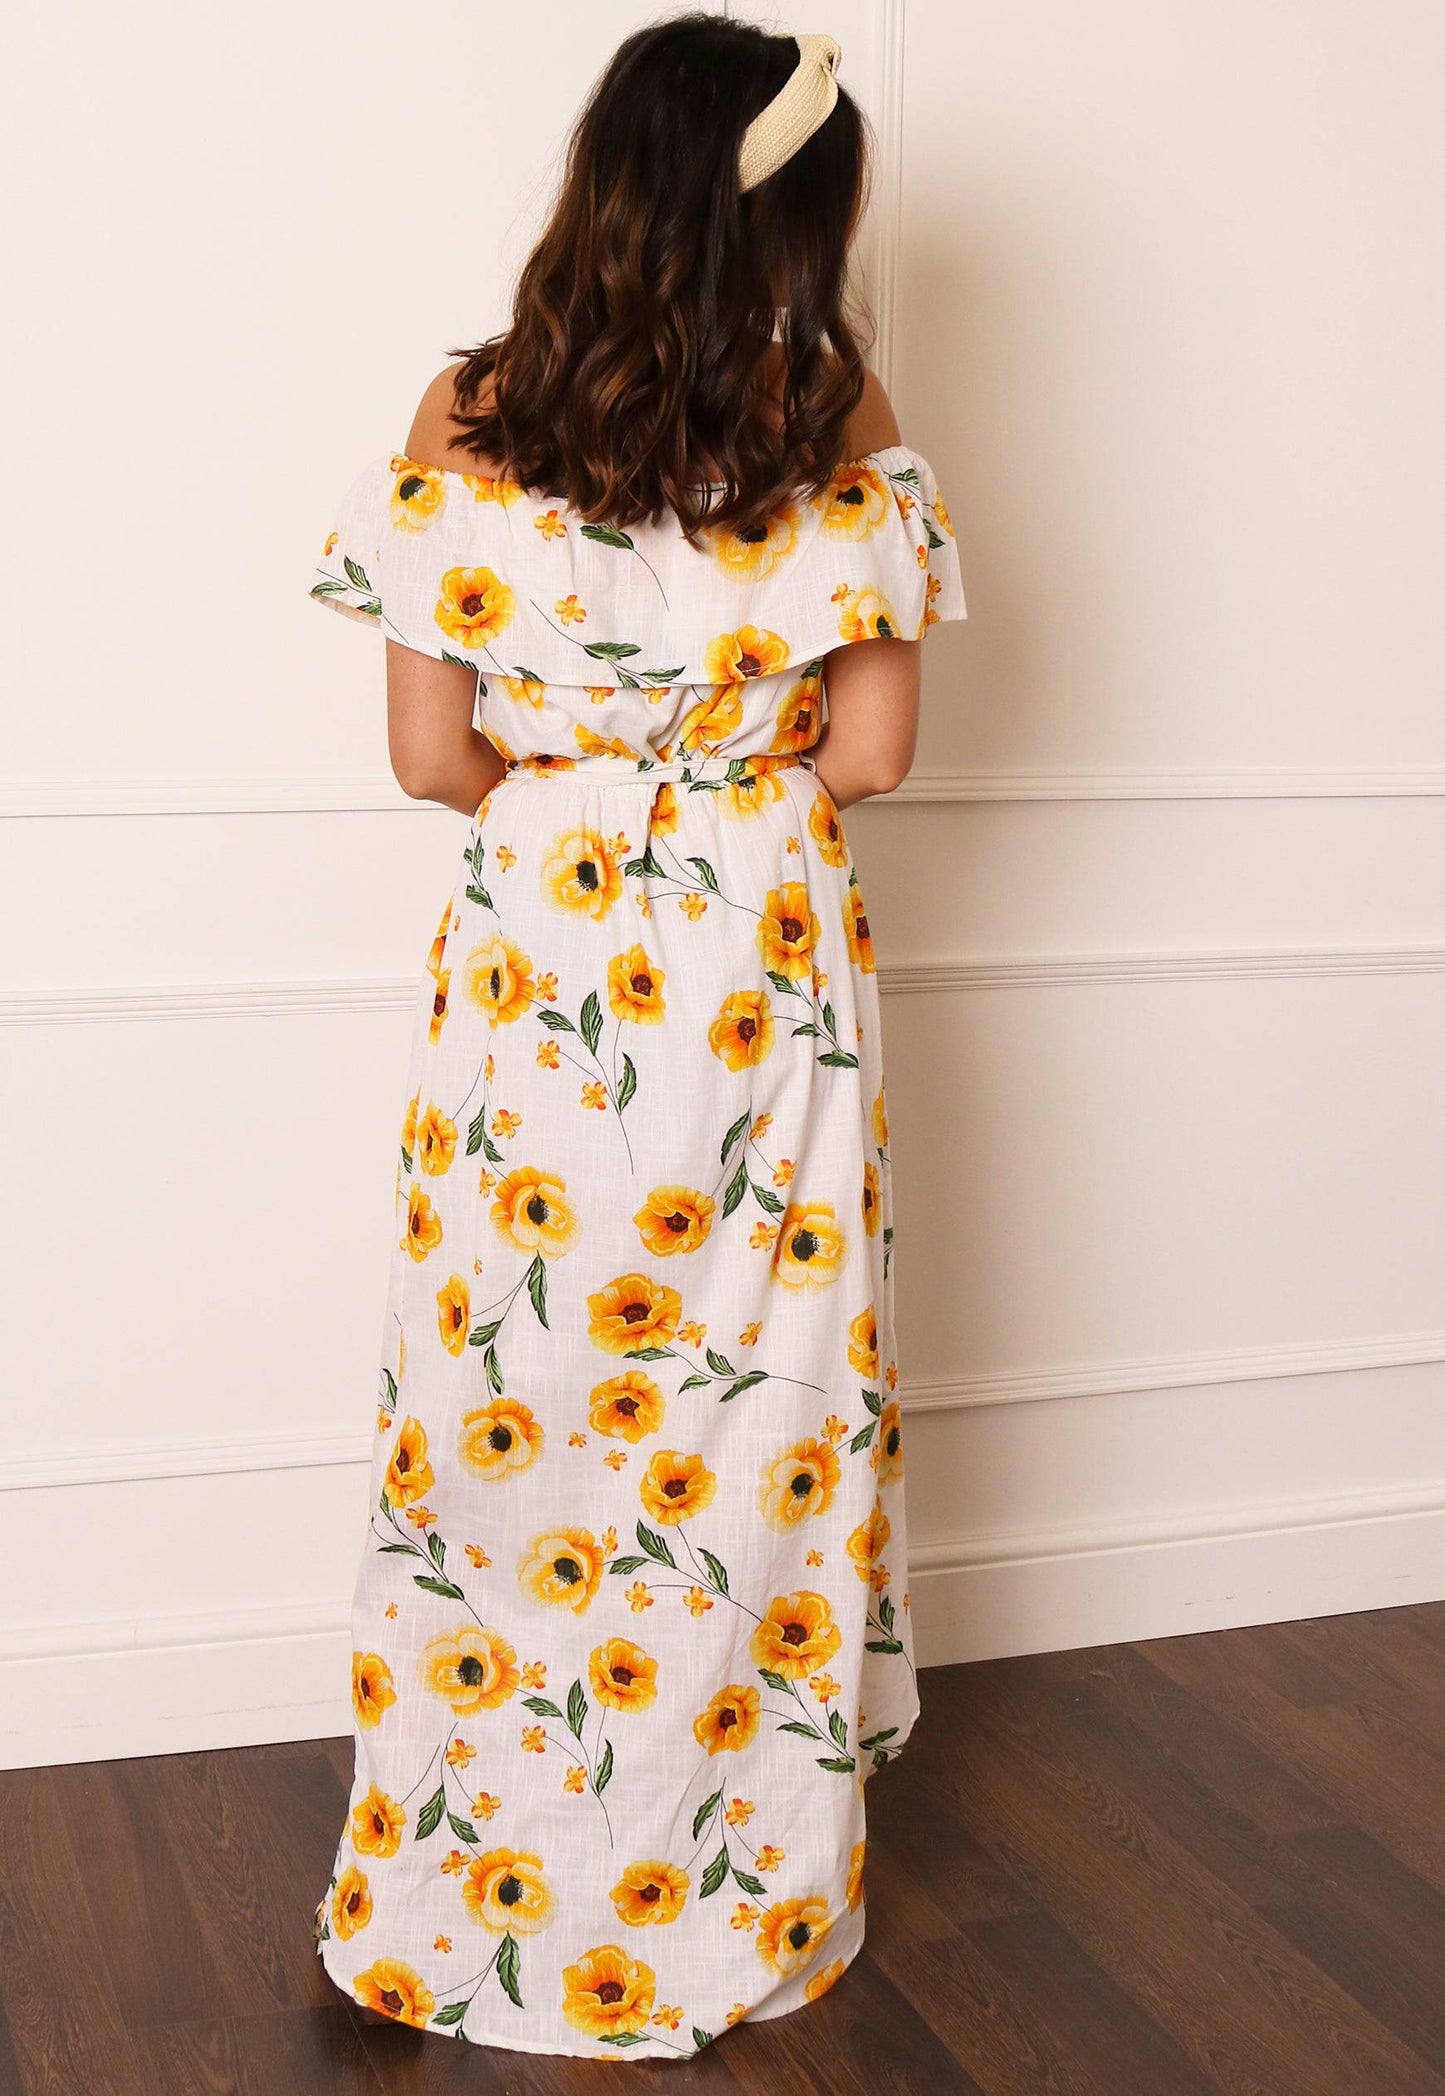 Sunflower Print Frill Off The Shoulder Bandeau Maxi Dress with Wrap Skirt in White & Yellow - concretebartops